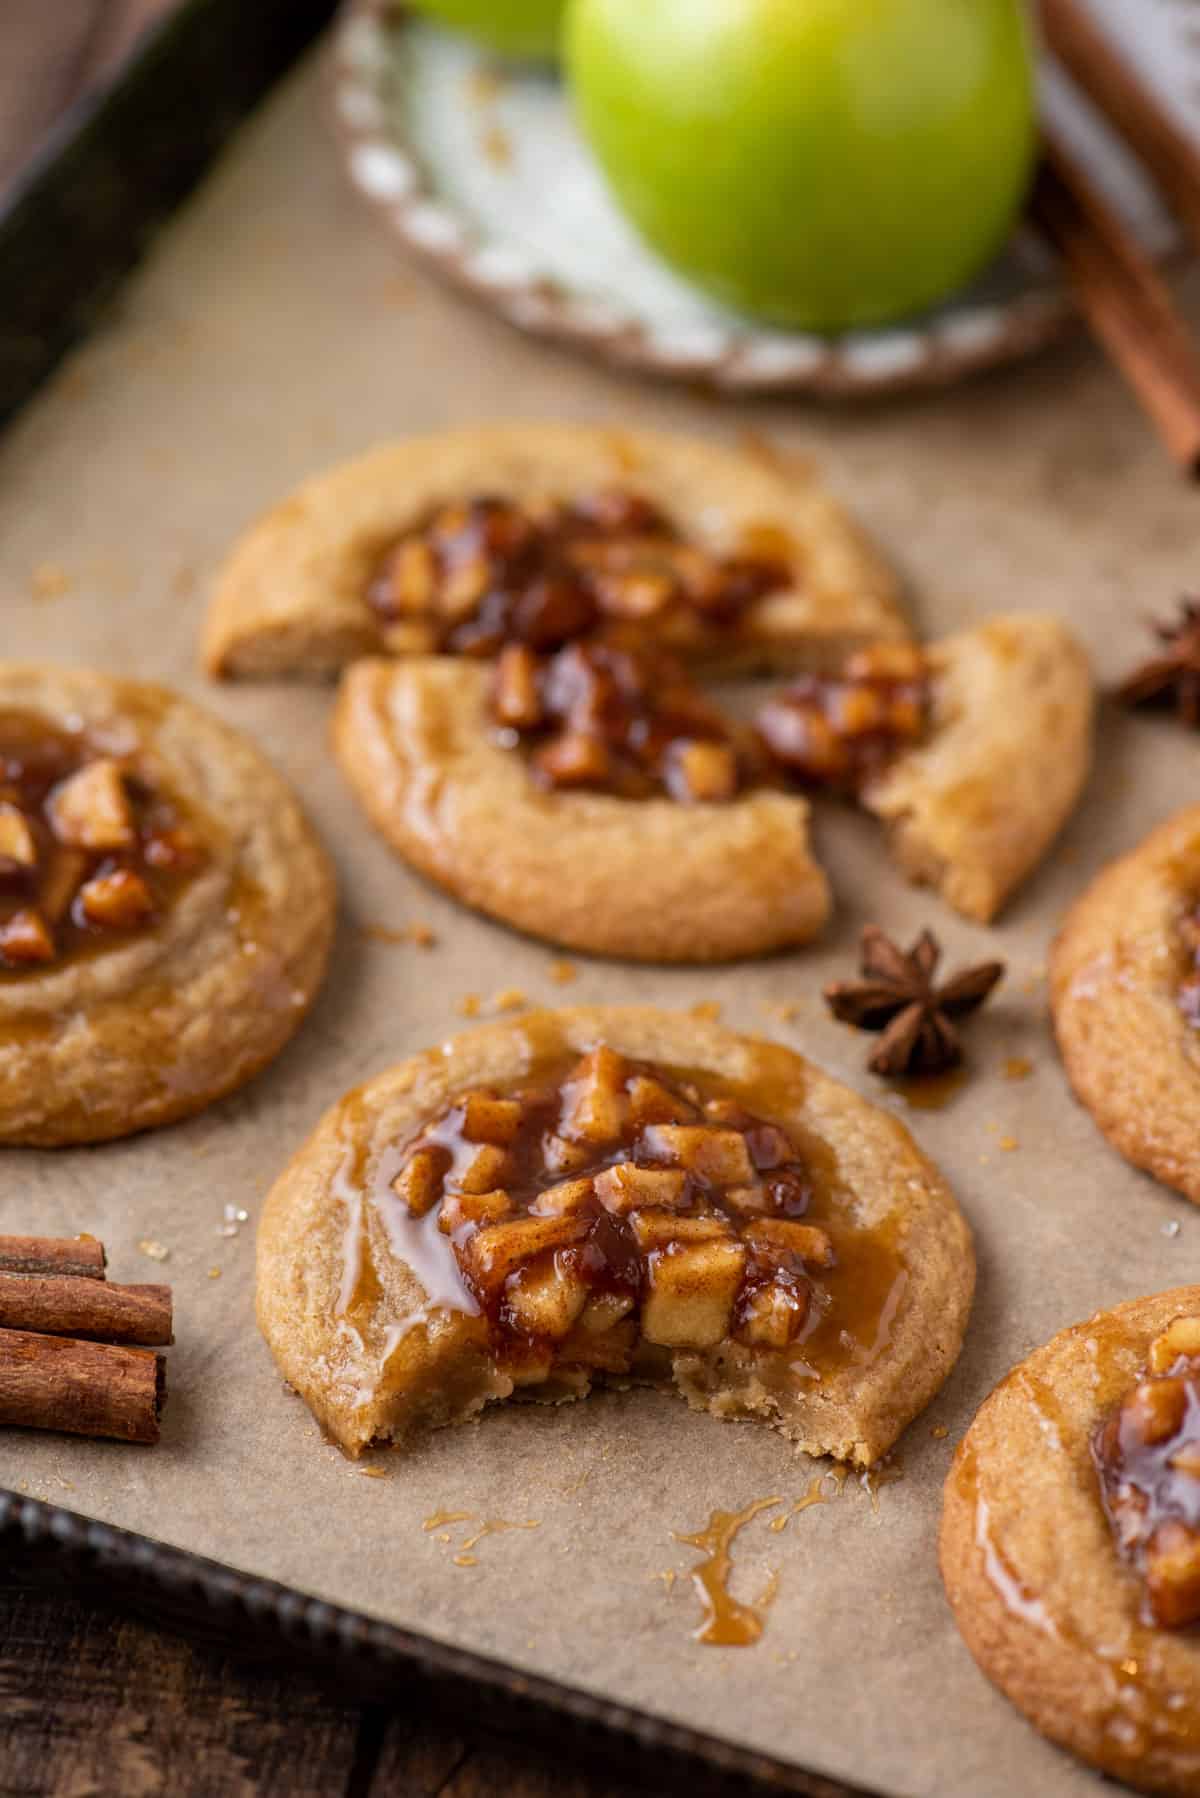 These Apple Pie Cookies are tender, chewy, and the perfect way to use fresh fall apples! A soft cinnamon spiced cookie is topped with homemade apple pie filling and then drizzled with gooey caramel. So good!